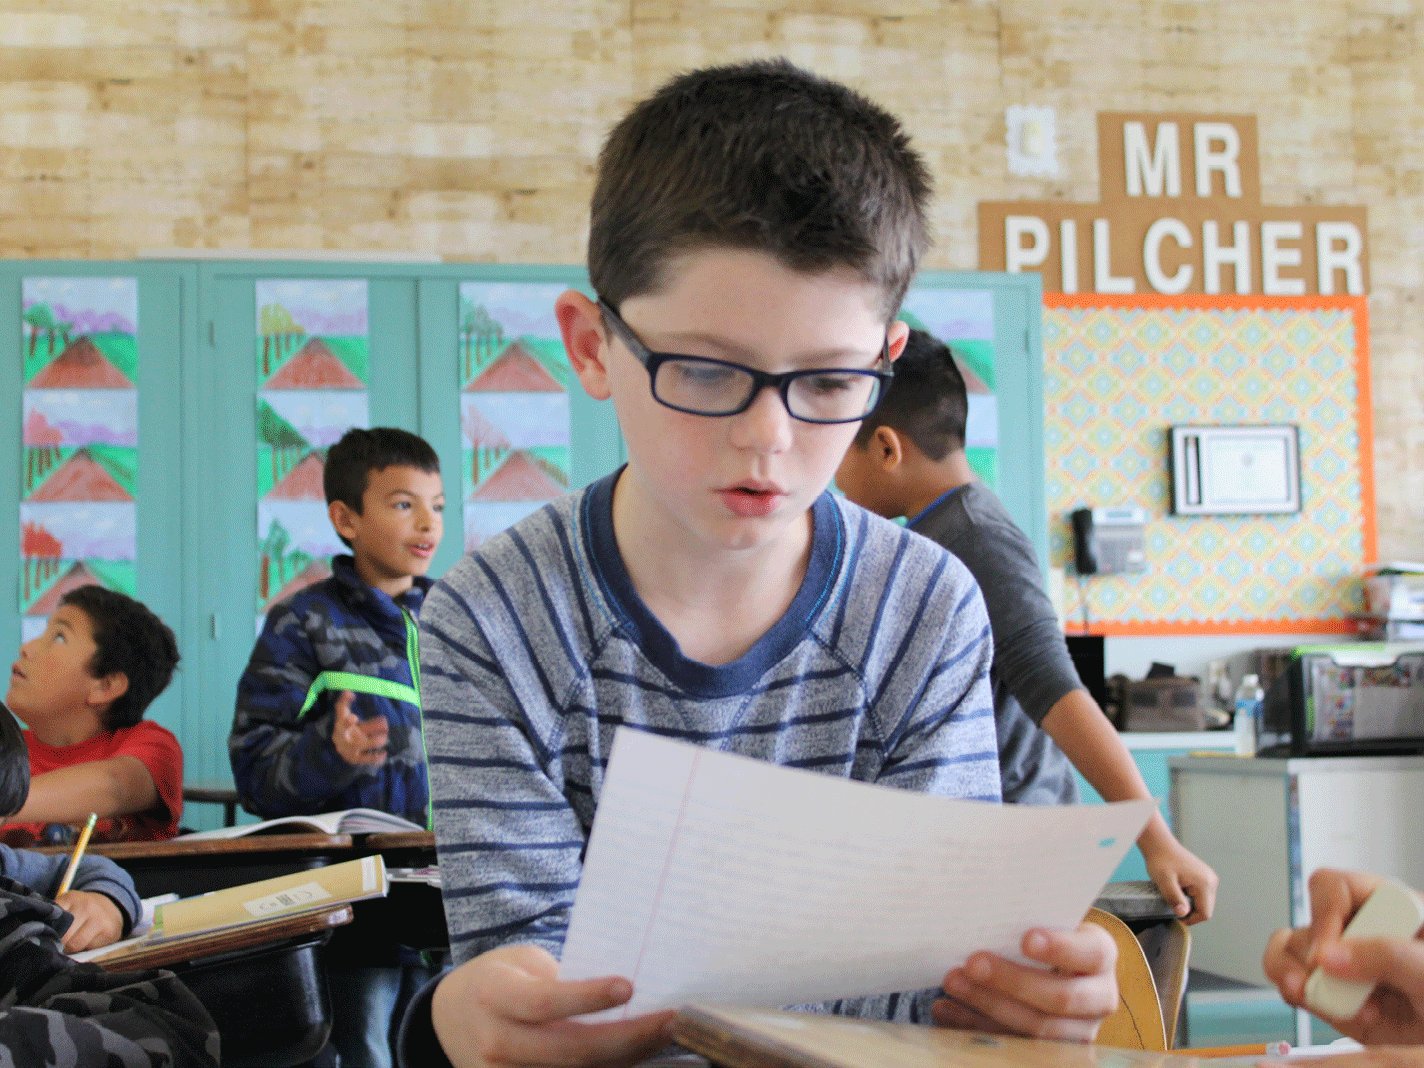 A boy in glasses improves his reading with a paper in a classroom among other students and colorful art in the background.